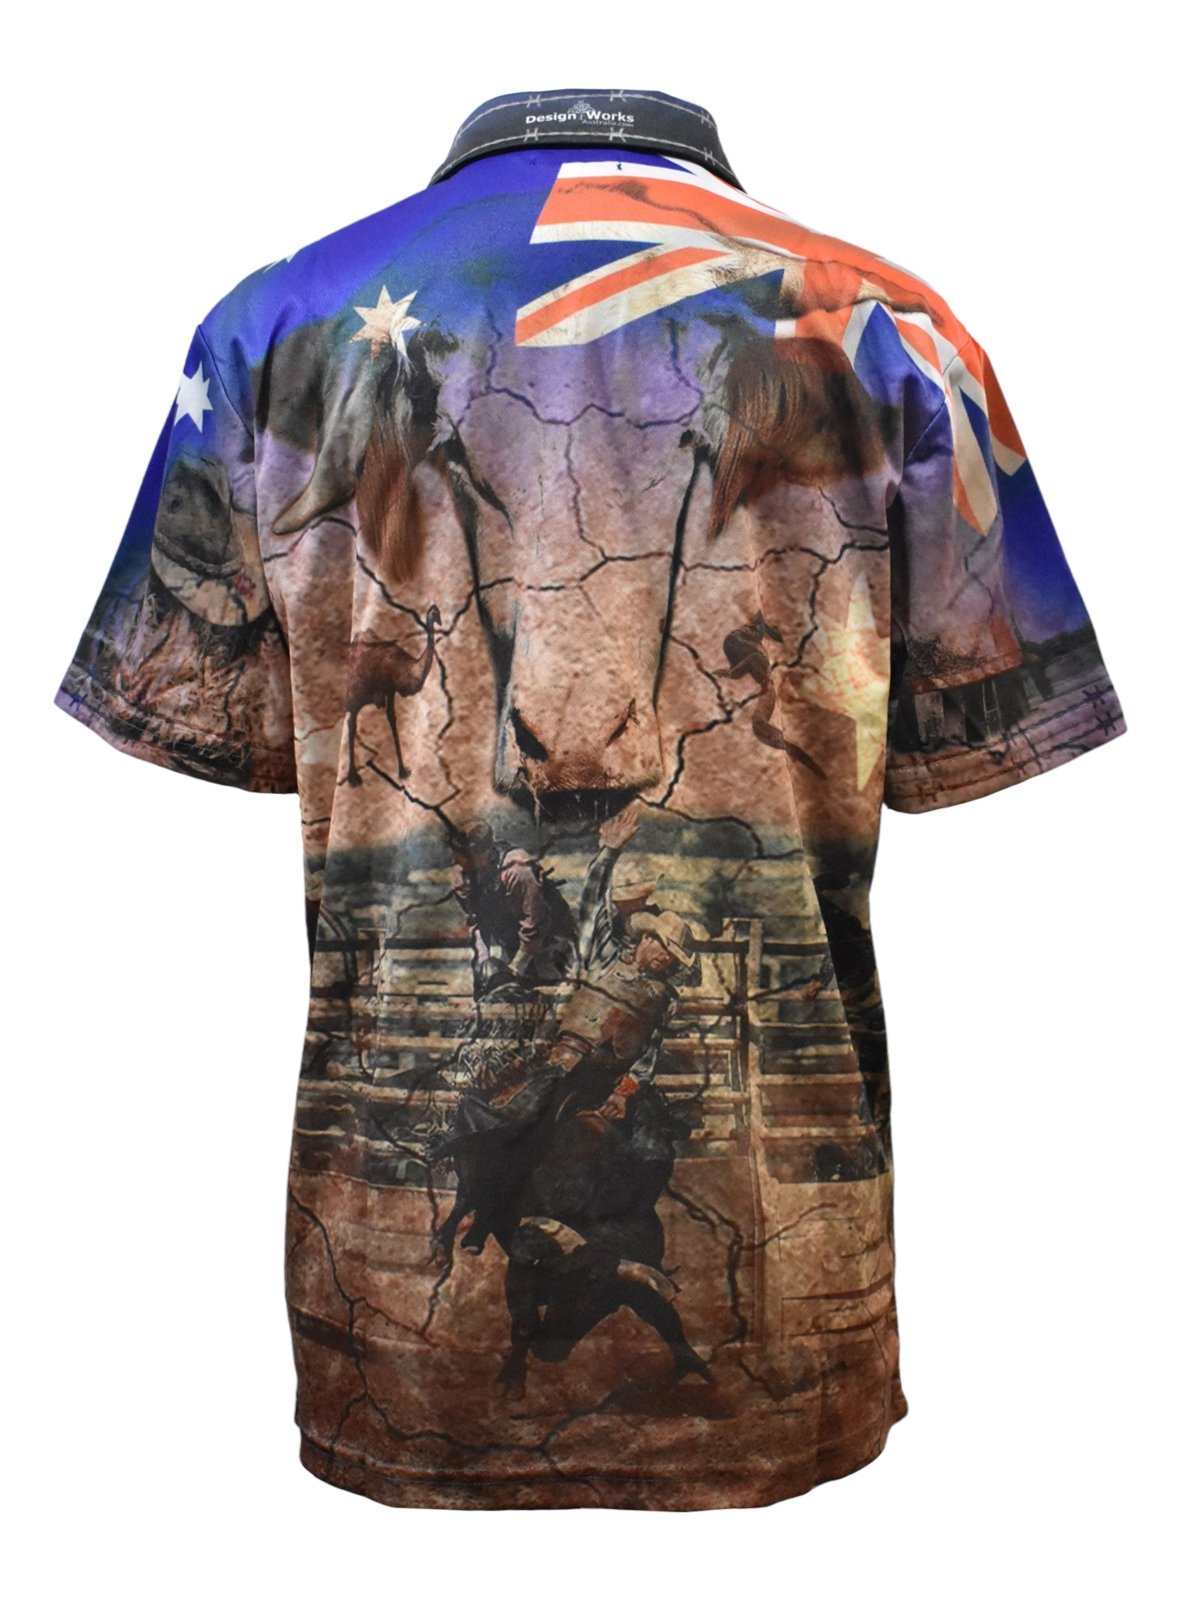 Adult S/S - My Country Australia - Design Works Apparel – Design